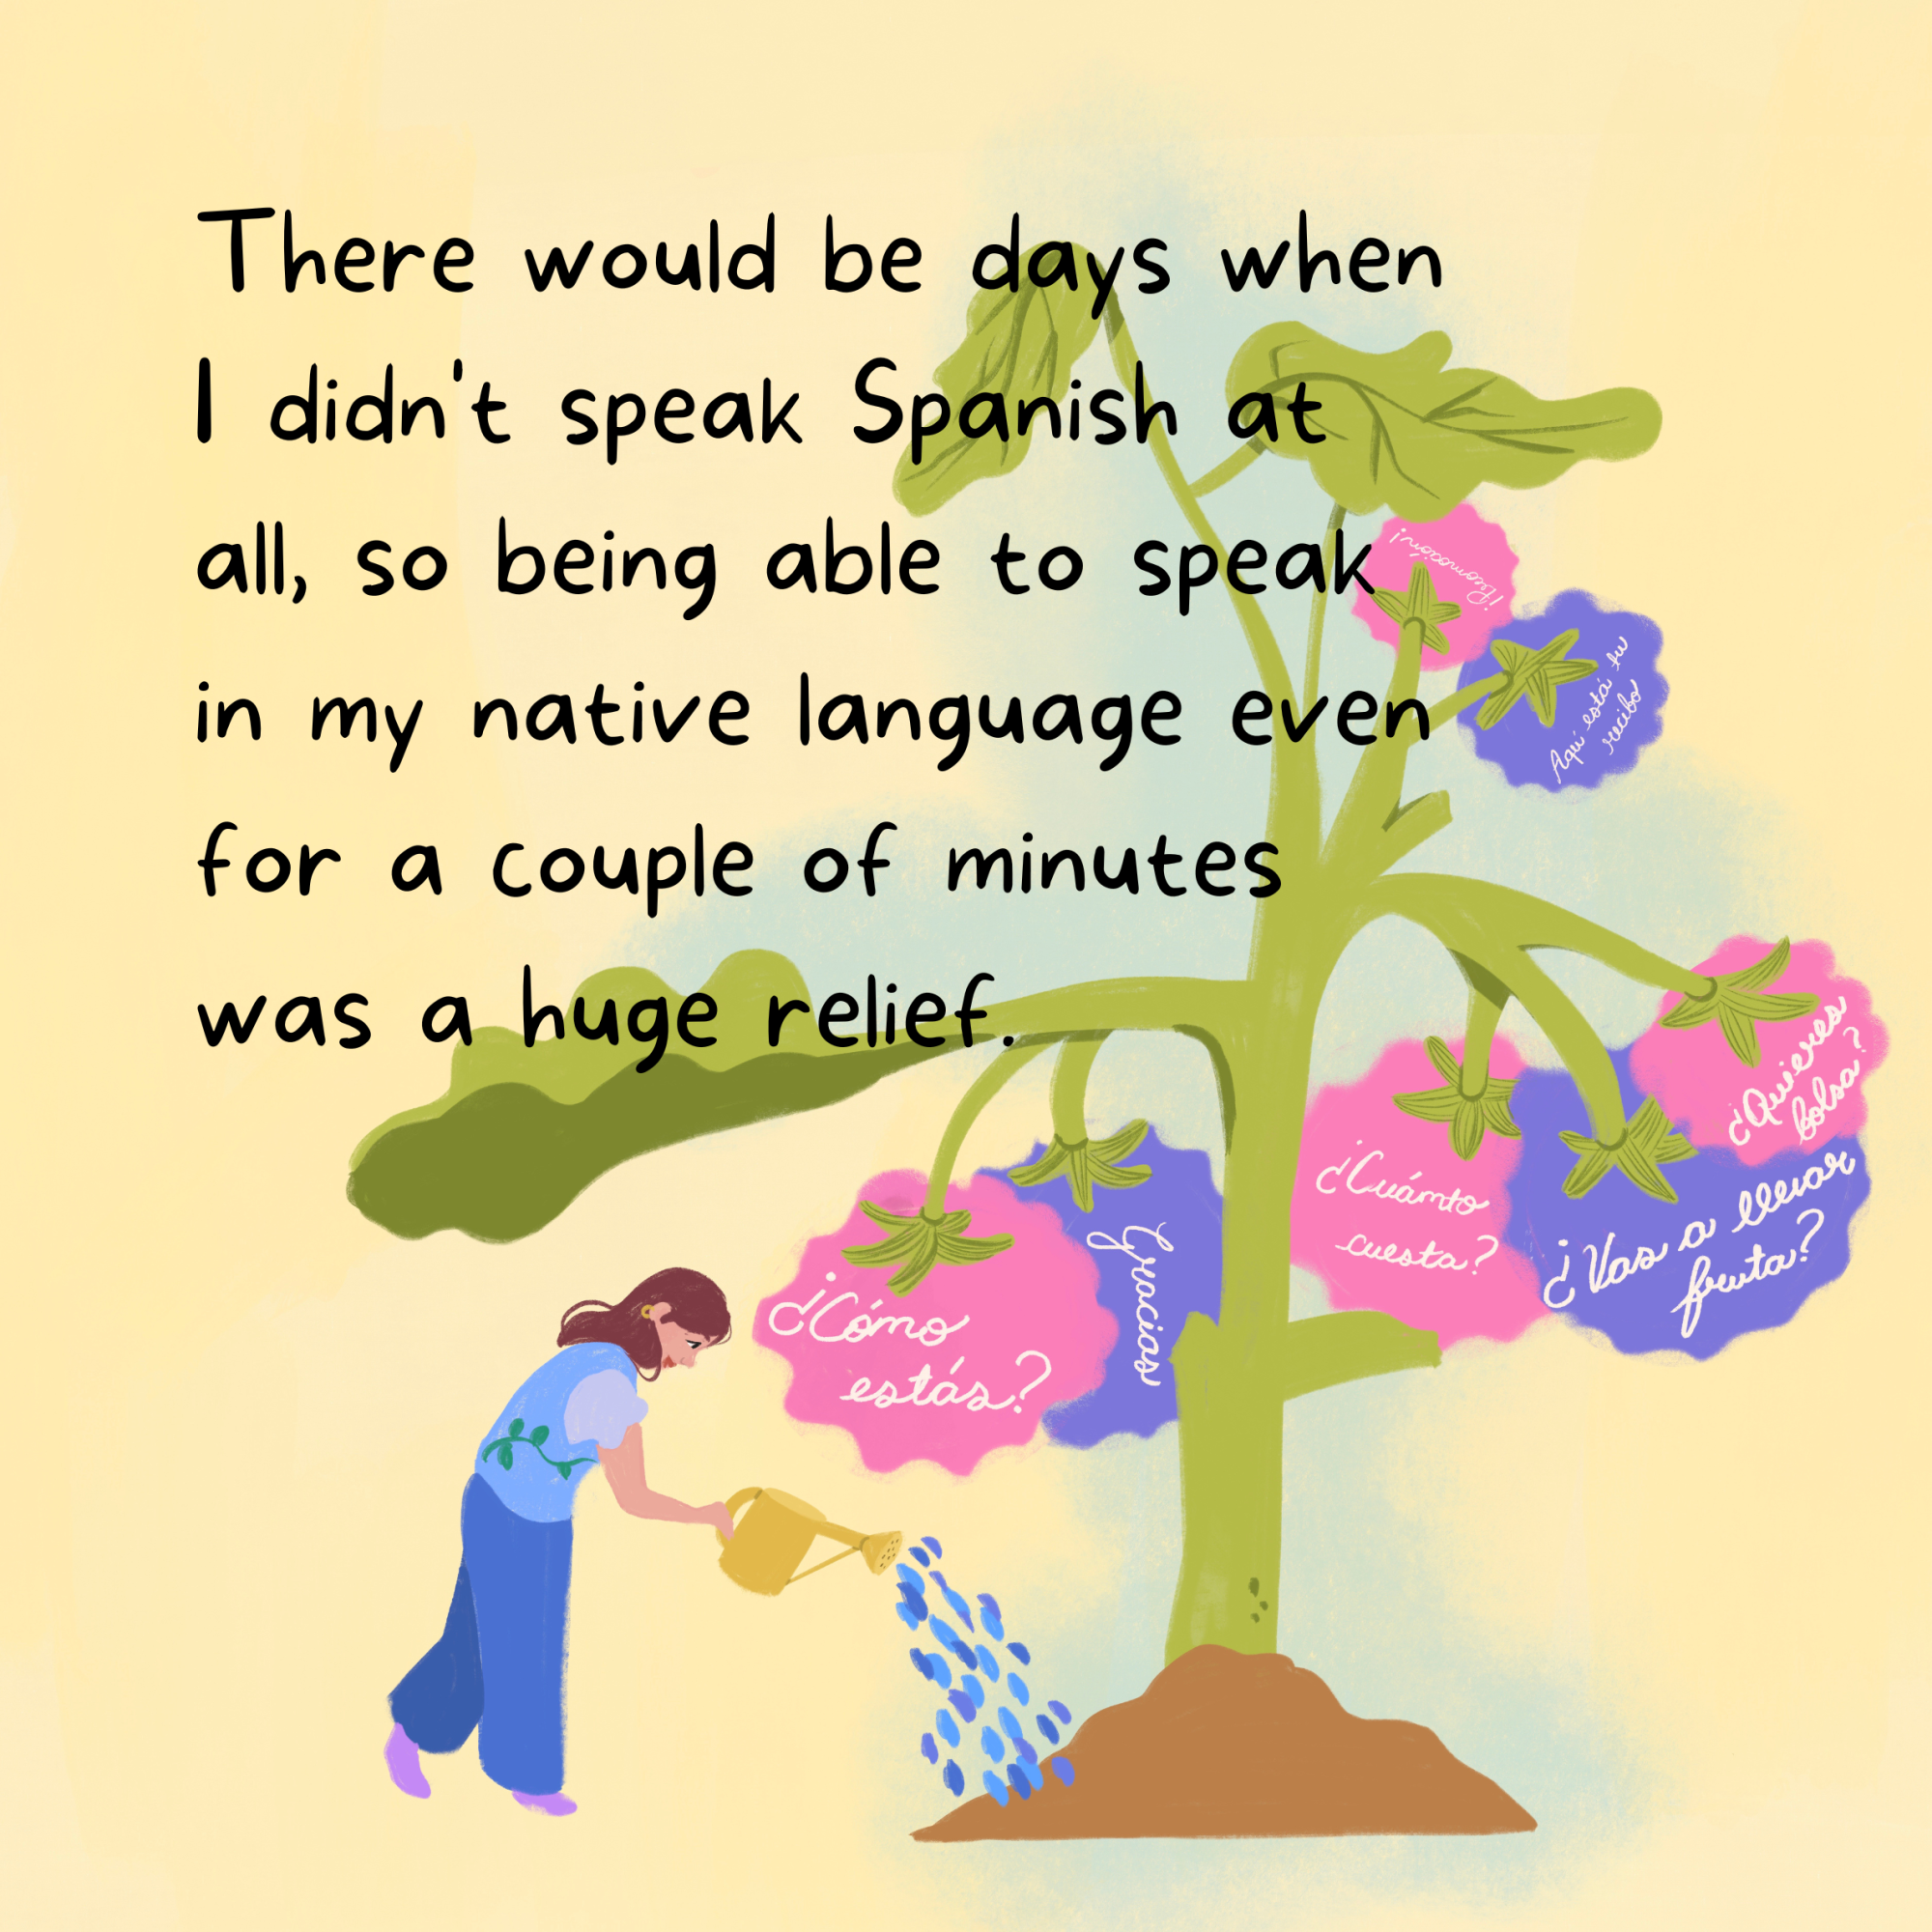 There would be days when I didn't speak Spanish at all, so being able to speak in my native language was a relief.